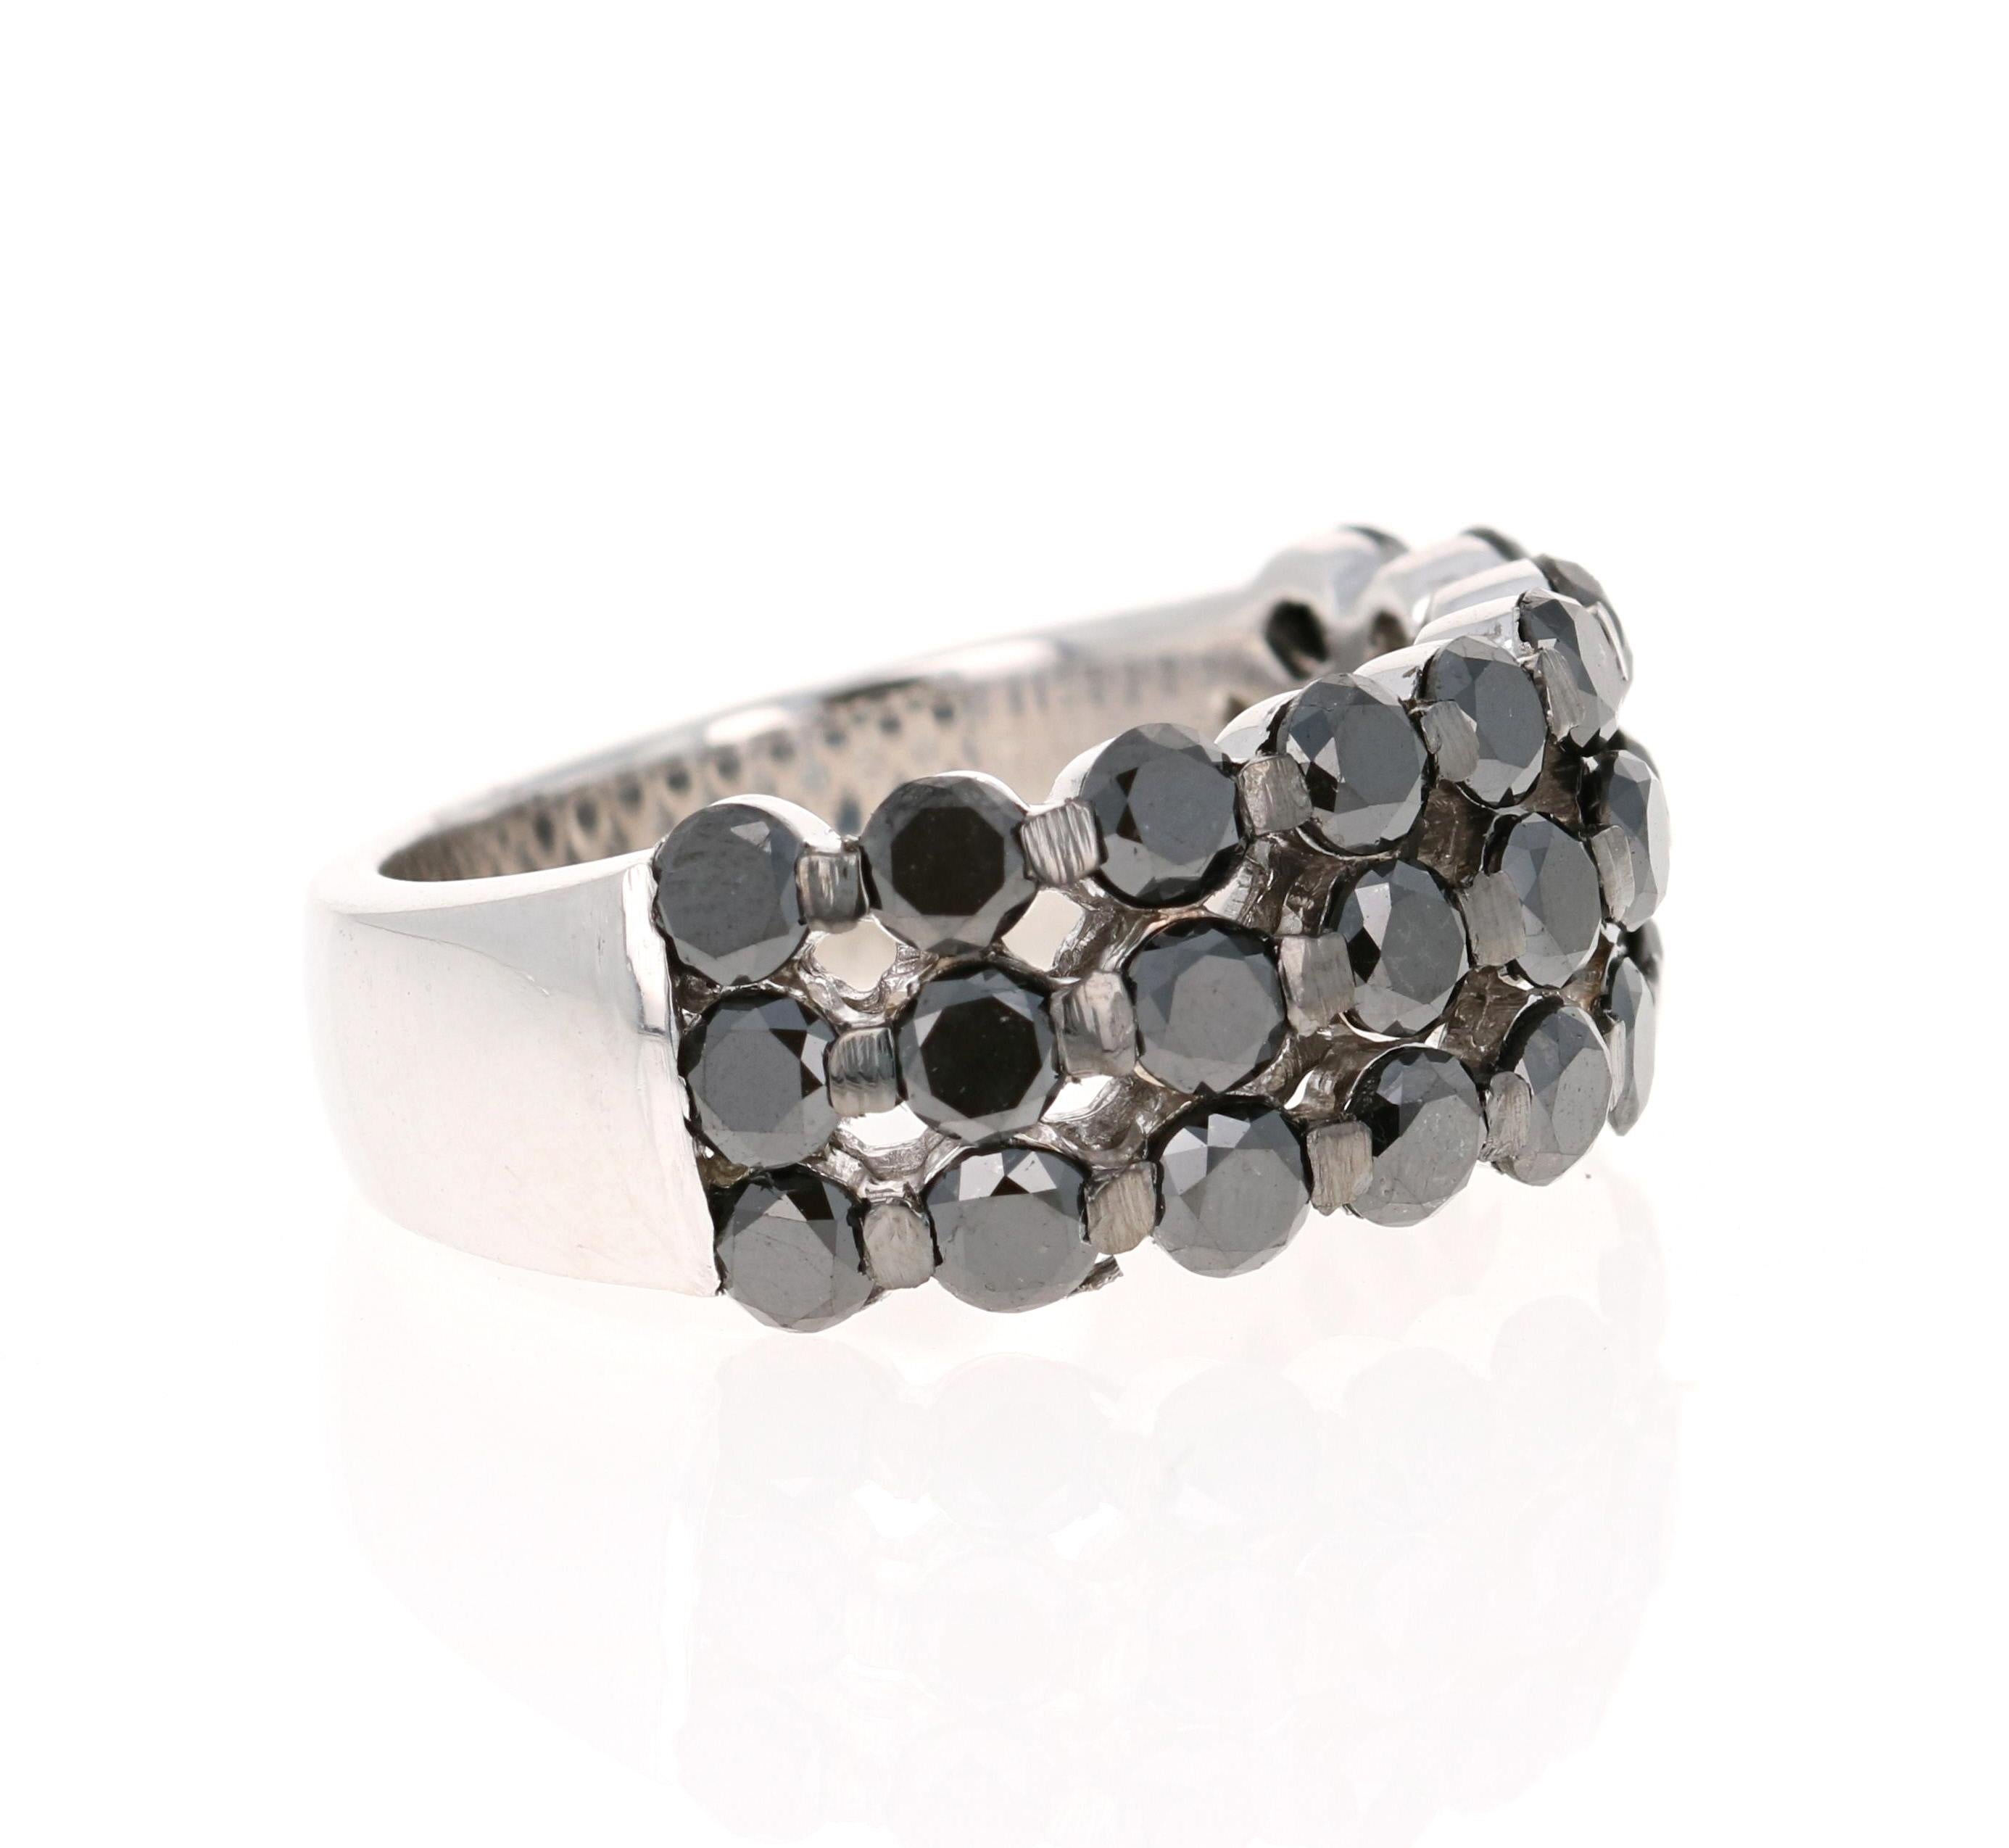 This ring has 27 Natural Rount Cut Black Diamonds that weigh 2.86 carats. 
The black diamonds are natural and are color treated to attain its black color. 

It is set in 14 Karat White Gold and has a weight of approximately 7.5 grams. 
The width of